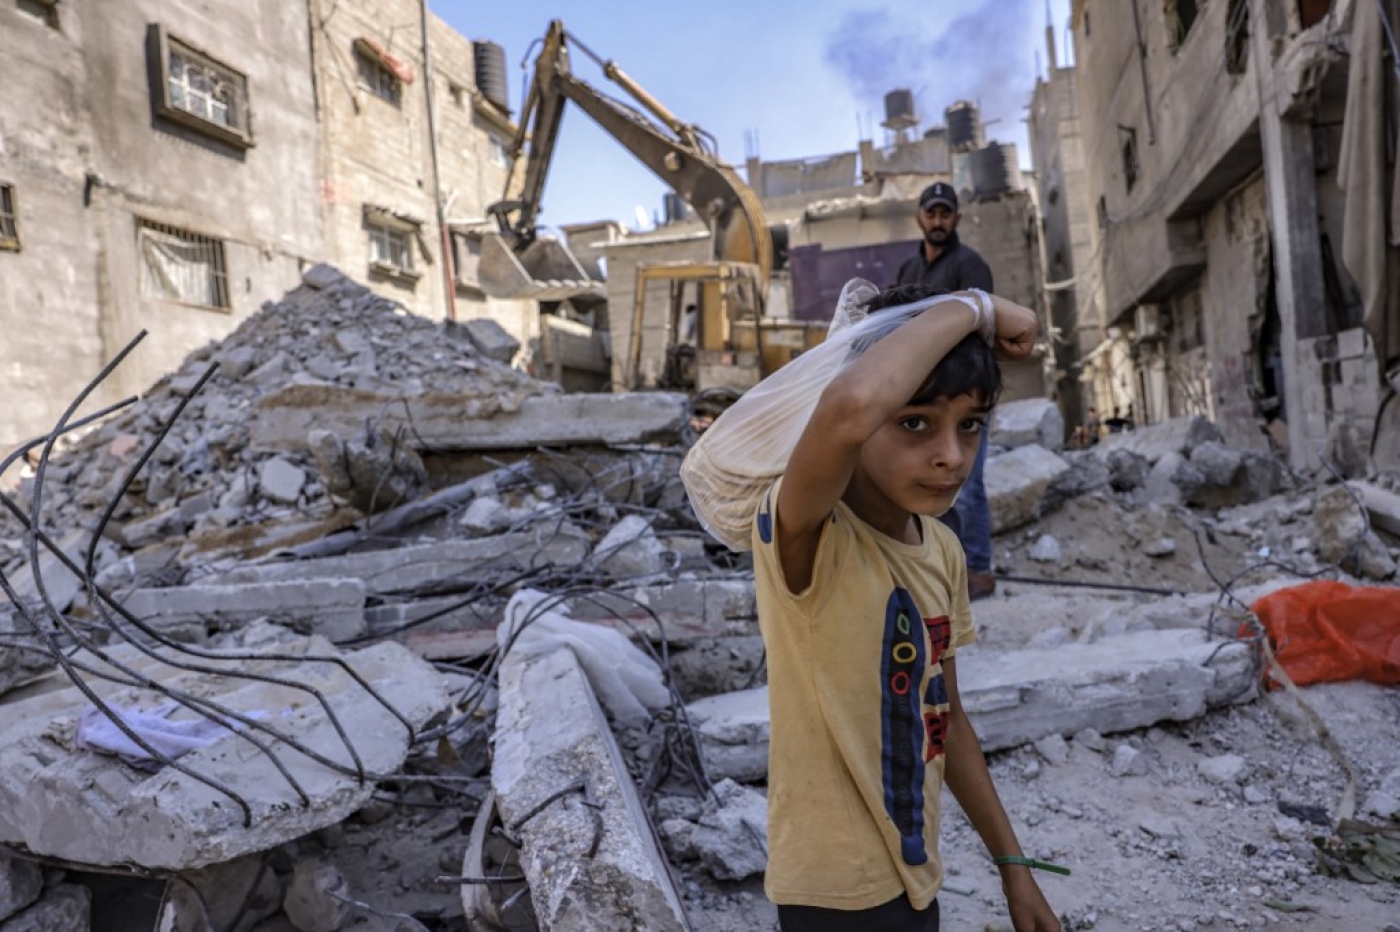 A Palestinian boy looks on as workers clear the rubble of a building destroyed by Israeli bombing during the 2021 war, in Rafah, Gaza, on 30 September 2021 (AFP)